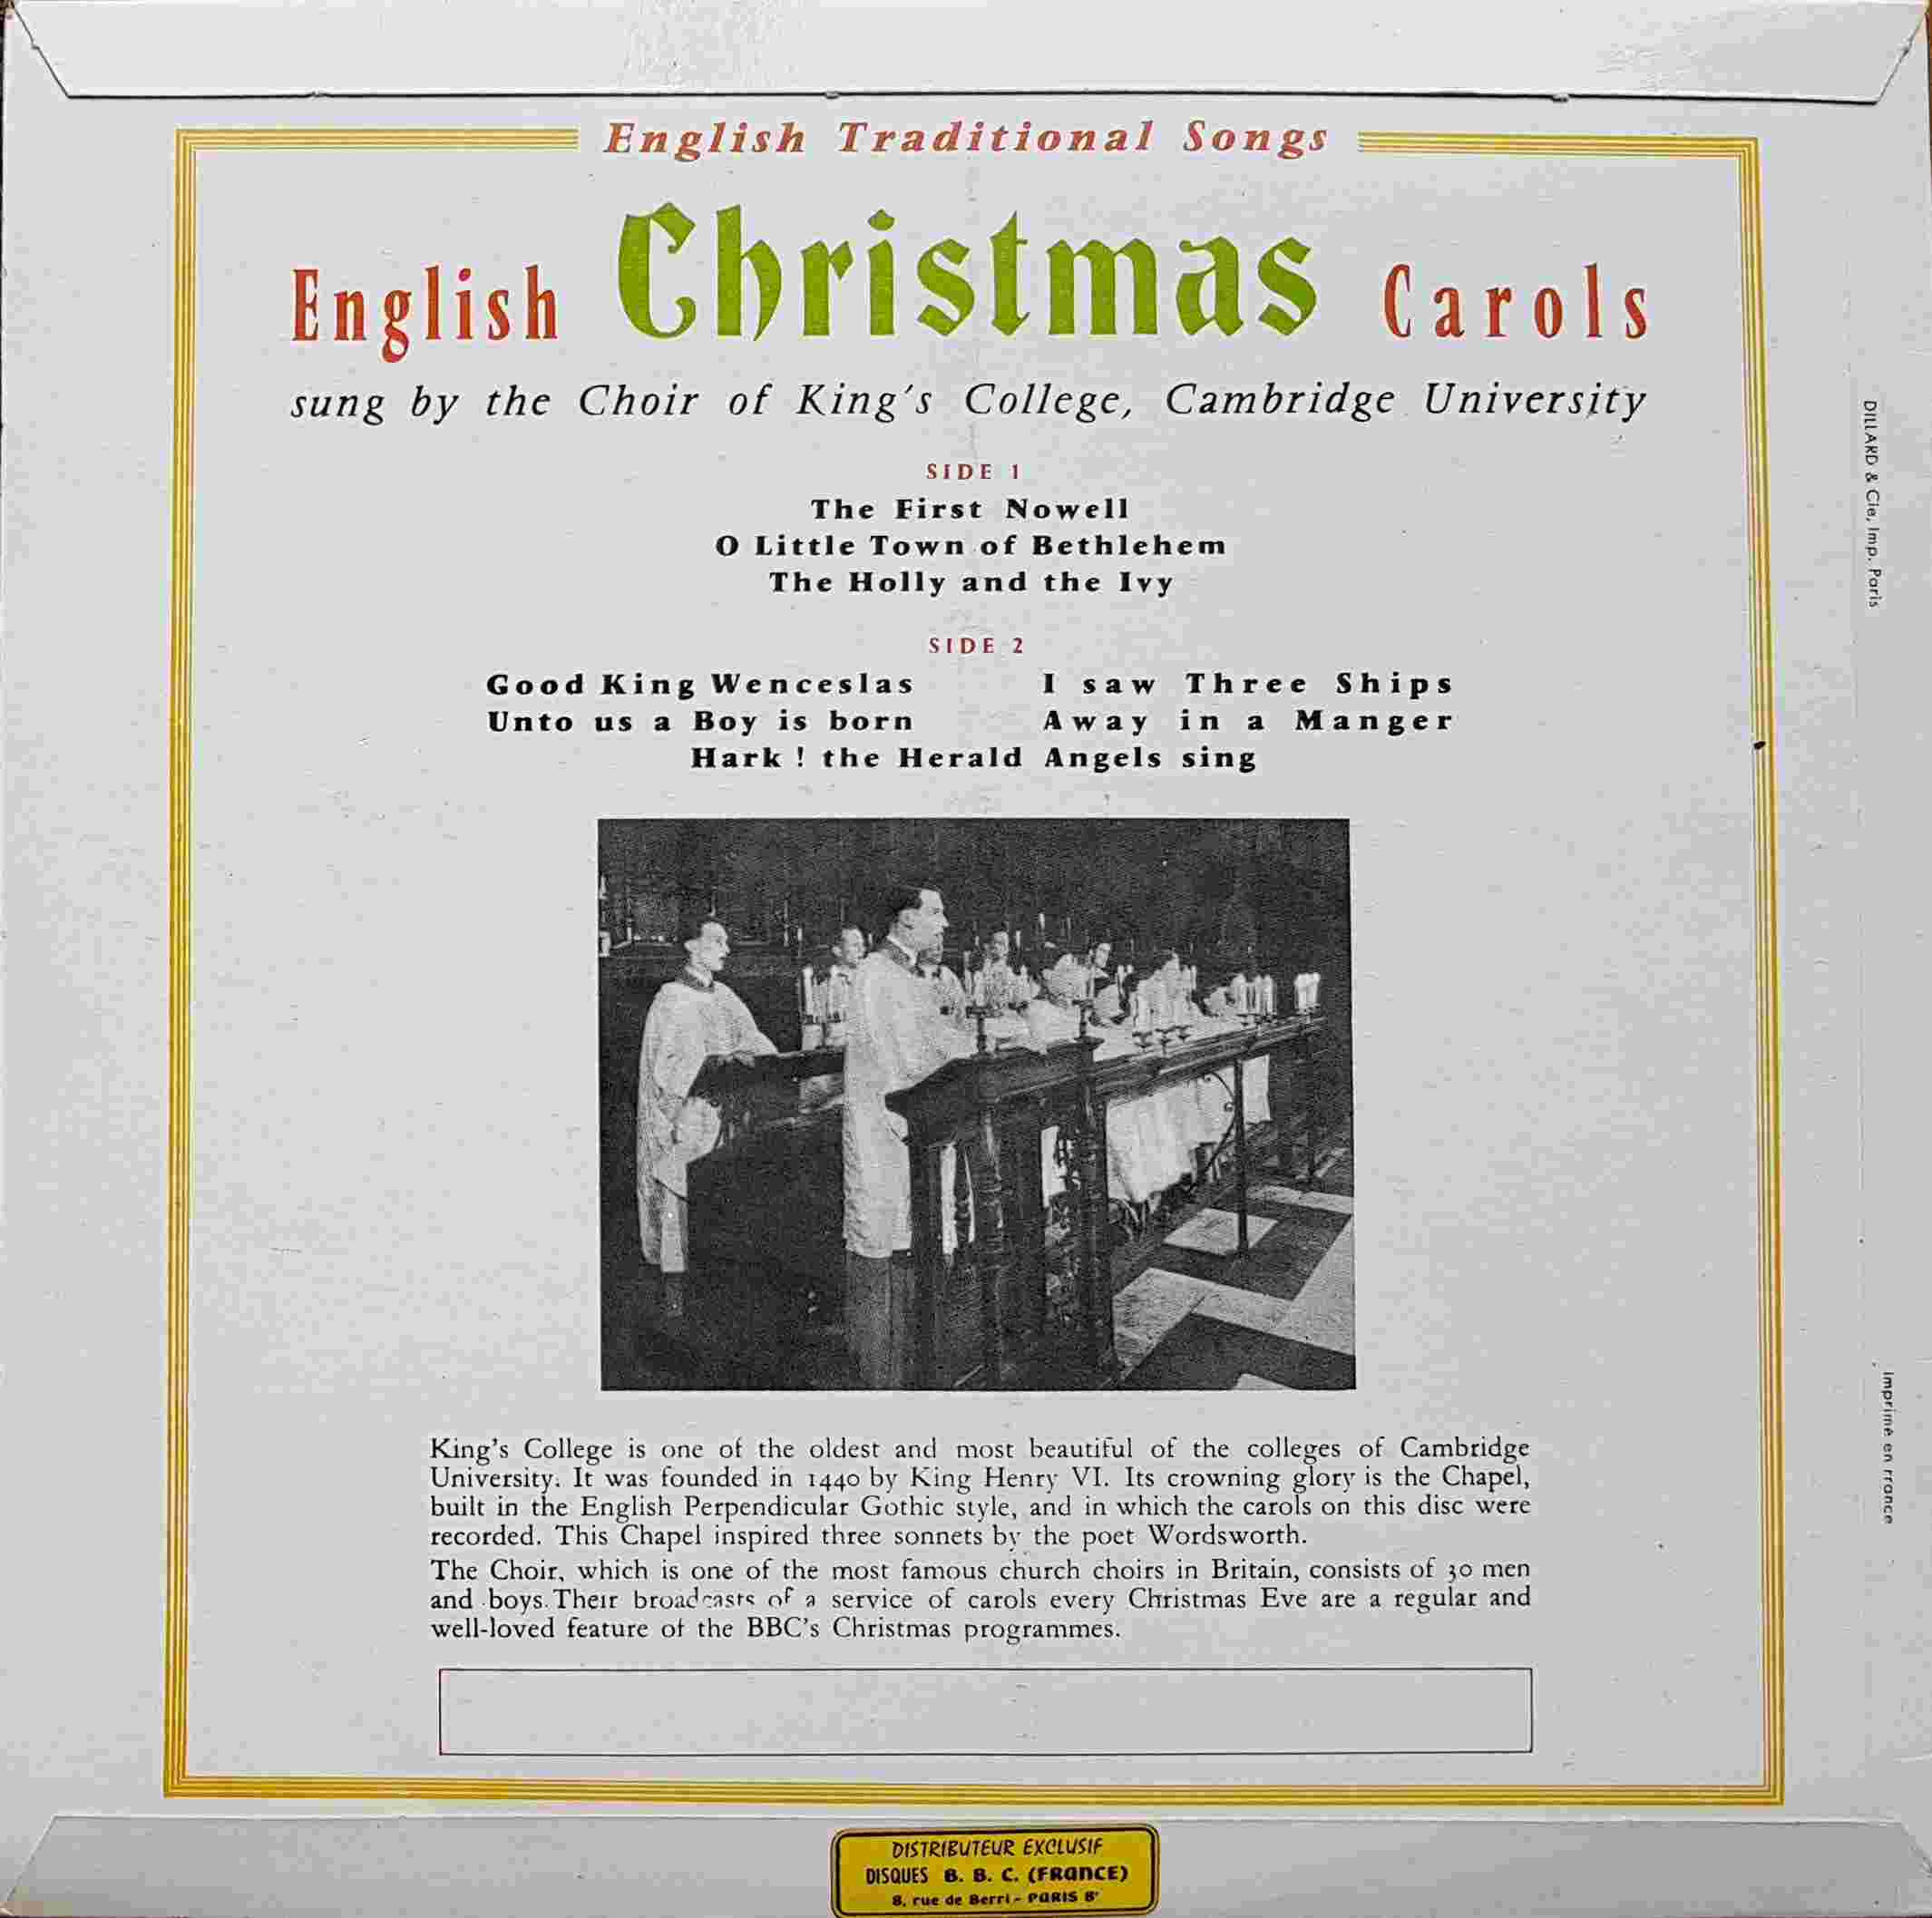 Picture of ETS 3 Christmas carols by artist Choir of King's College, Cambridge from the BBC records and Tapes library